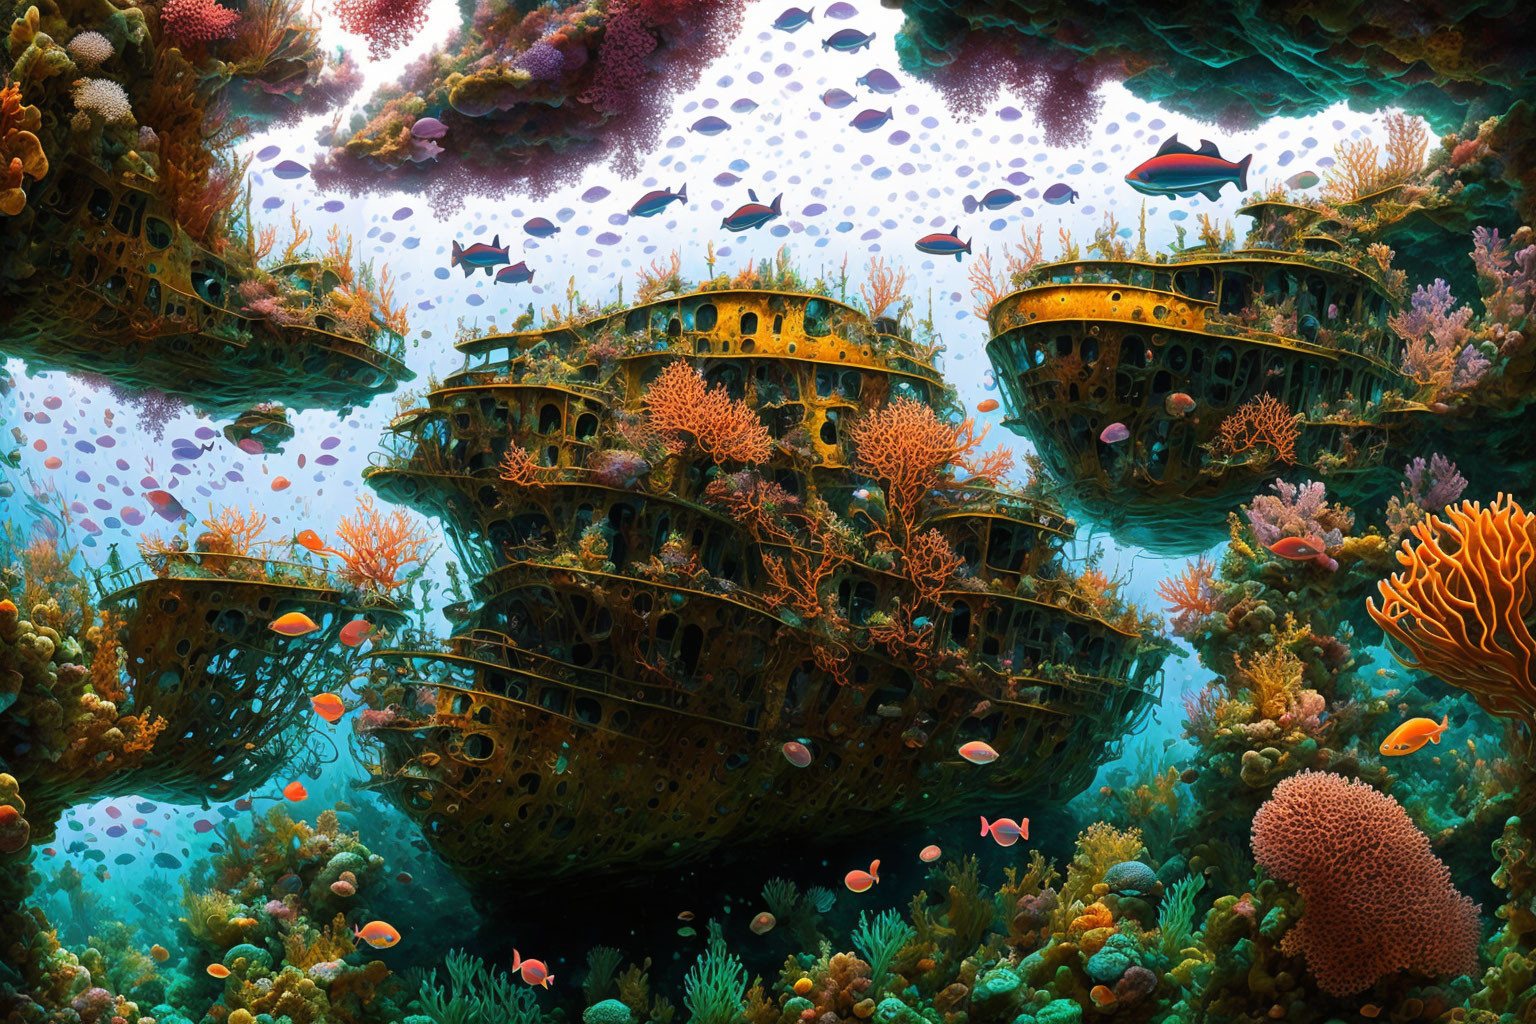 Vibrant Coral Reefs with Sunken Ships and Fish